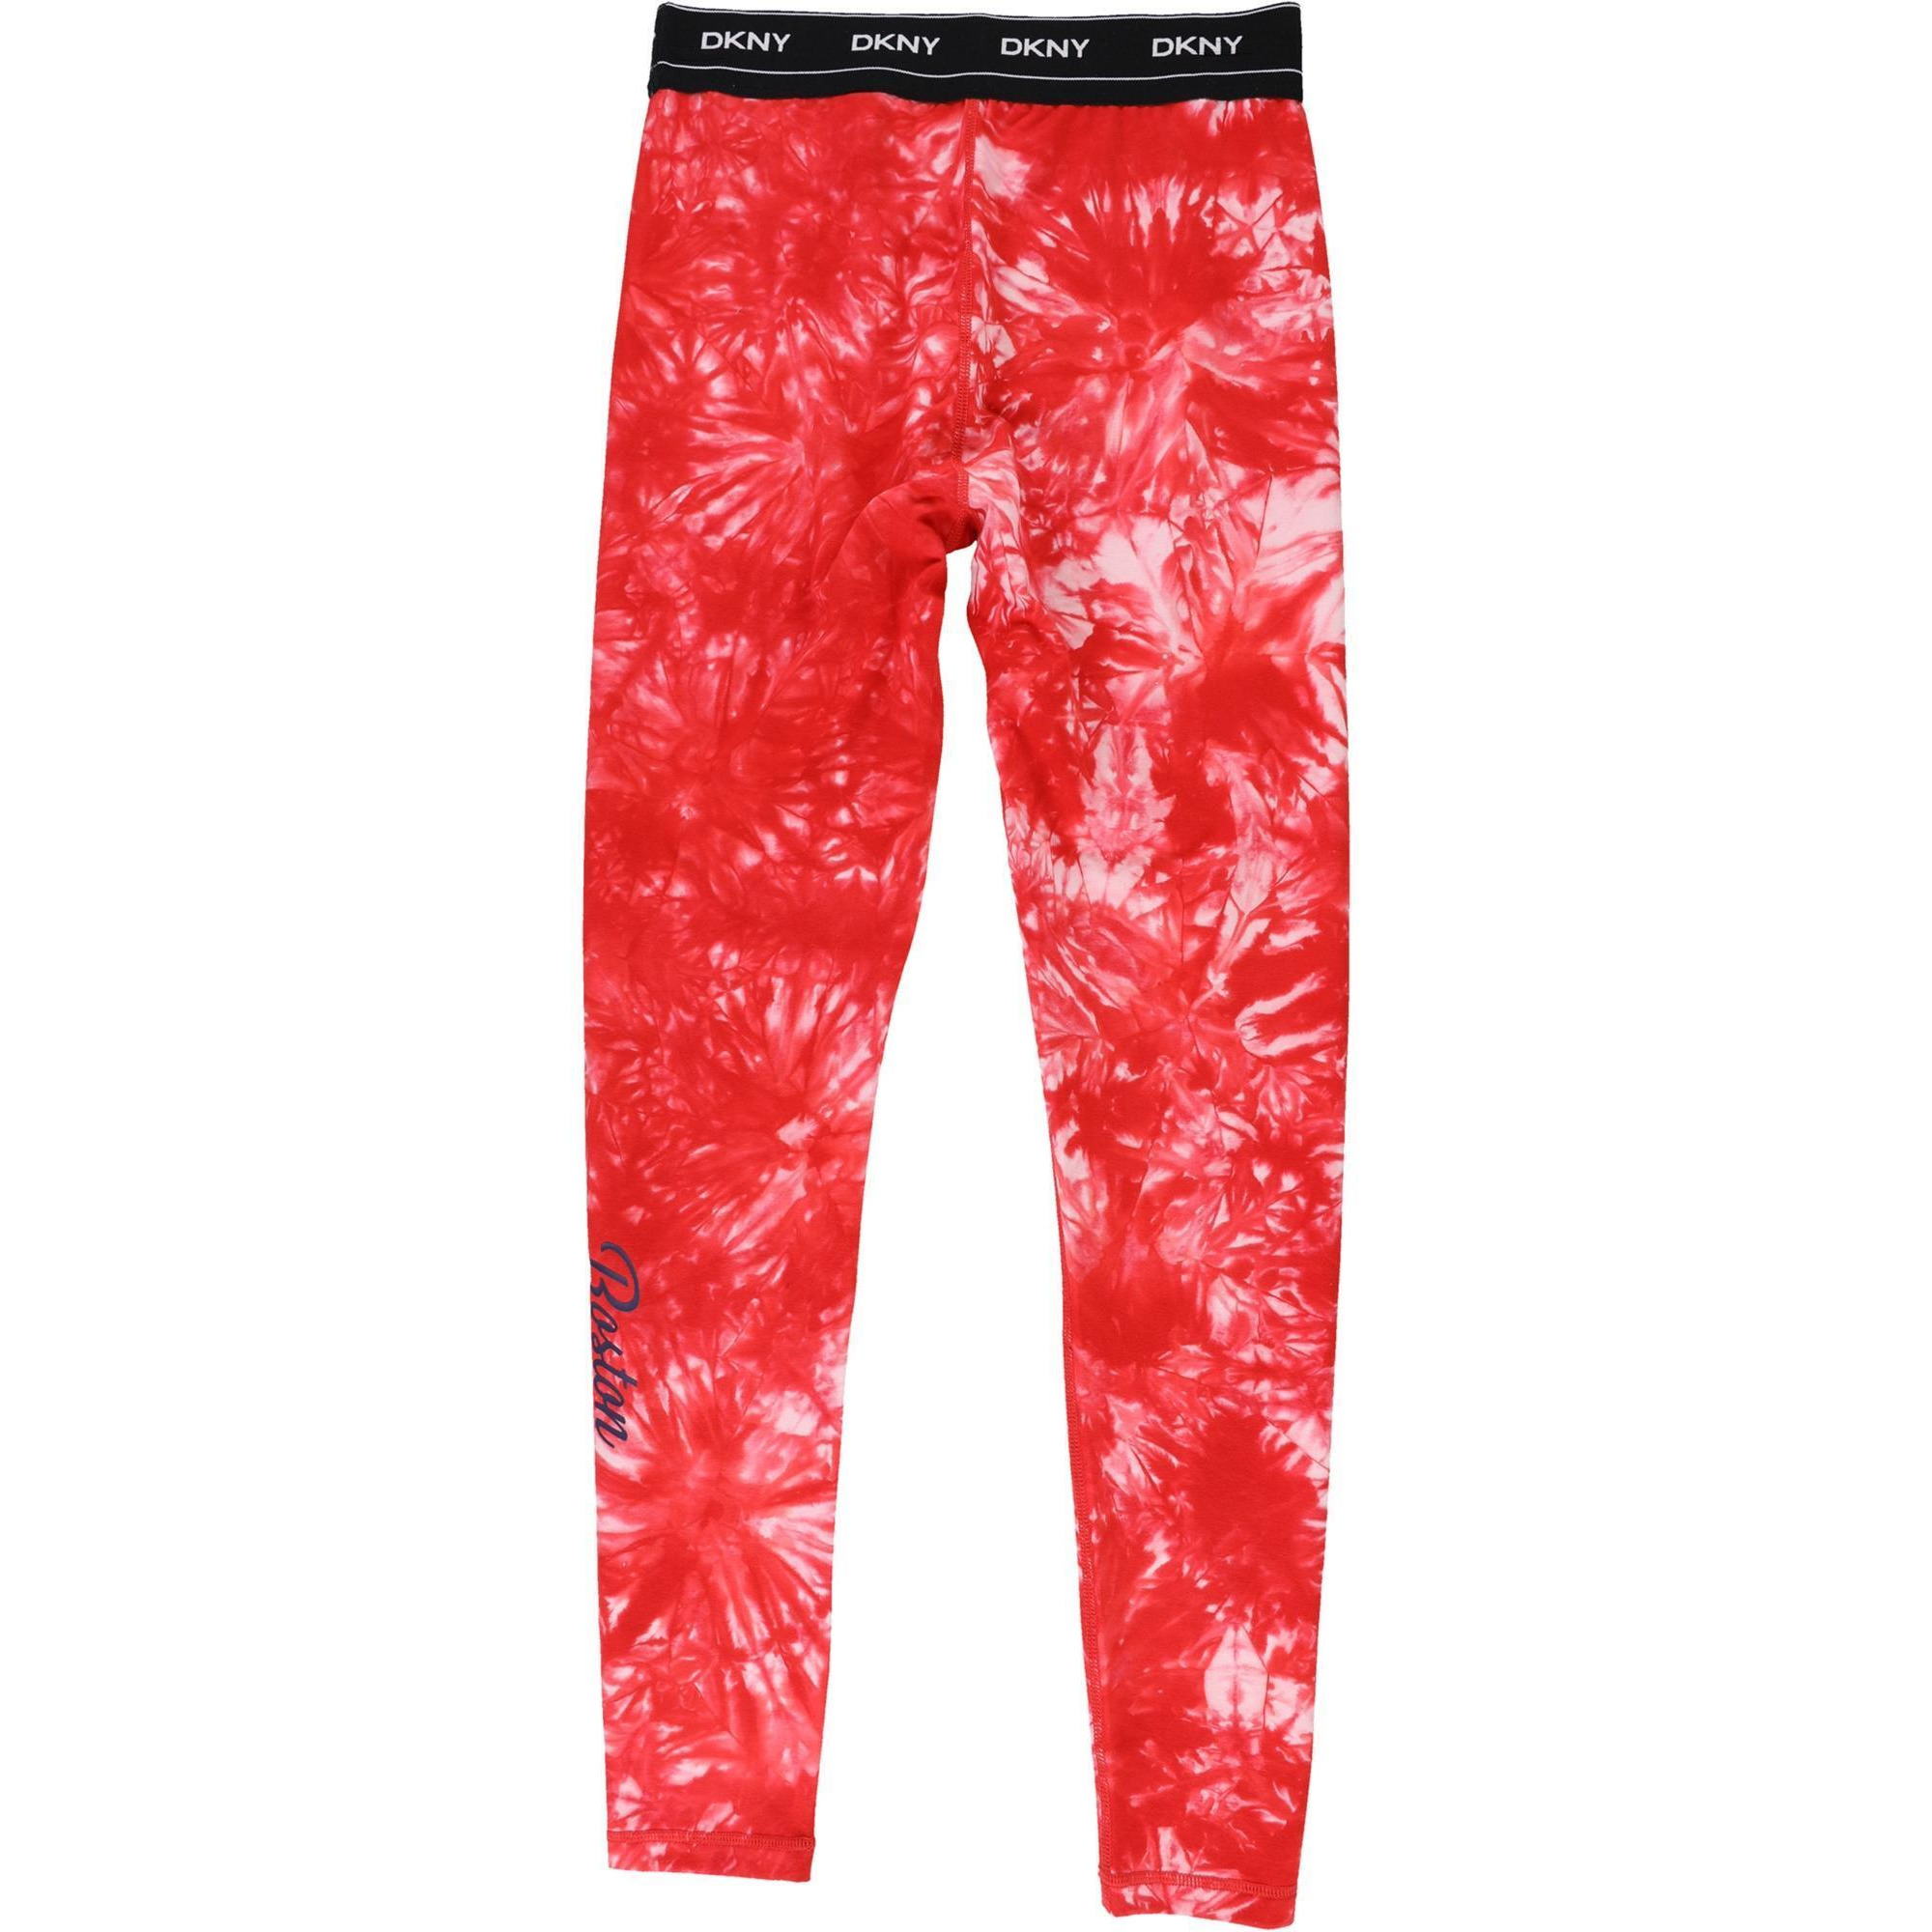 DKNY Womens Boston Red Sox Compression Athletic Pants, Style # DS25R883 alternate image